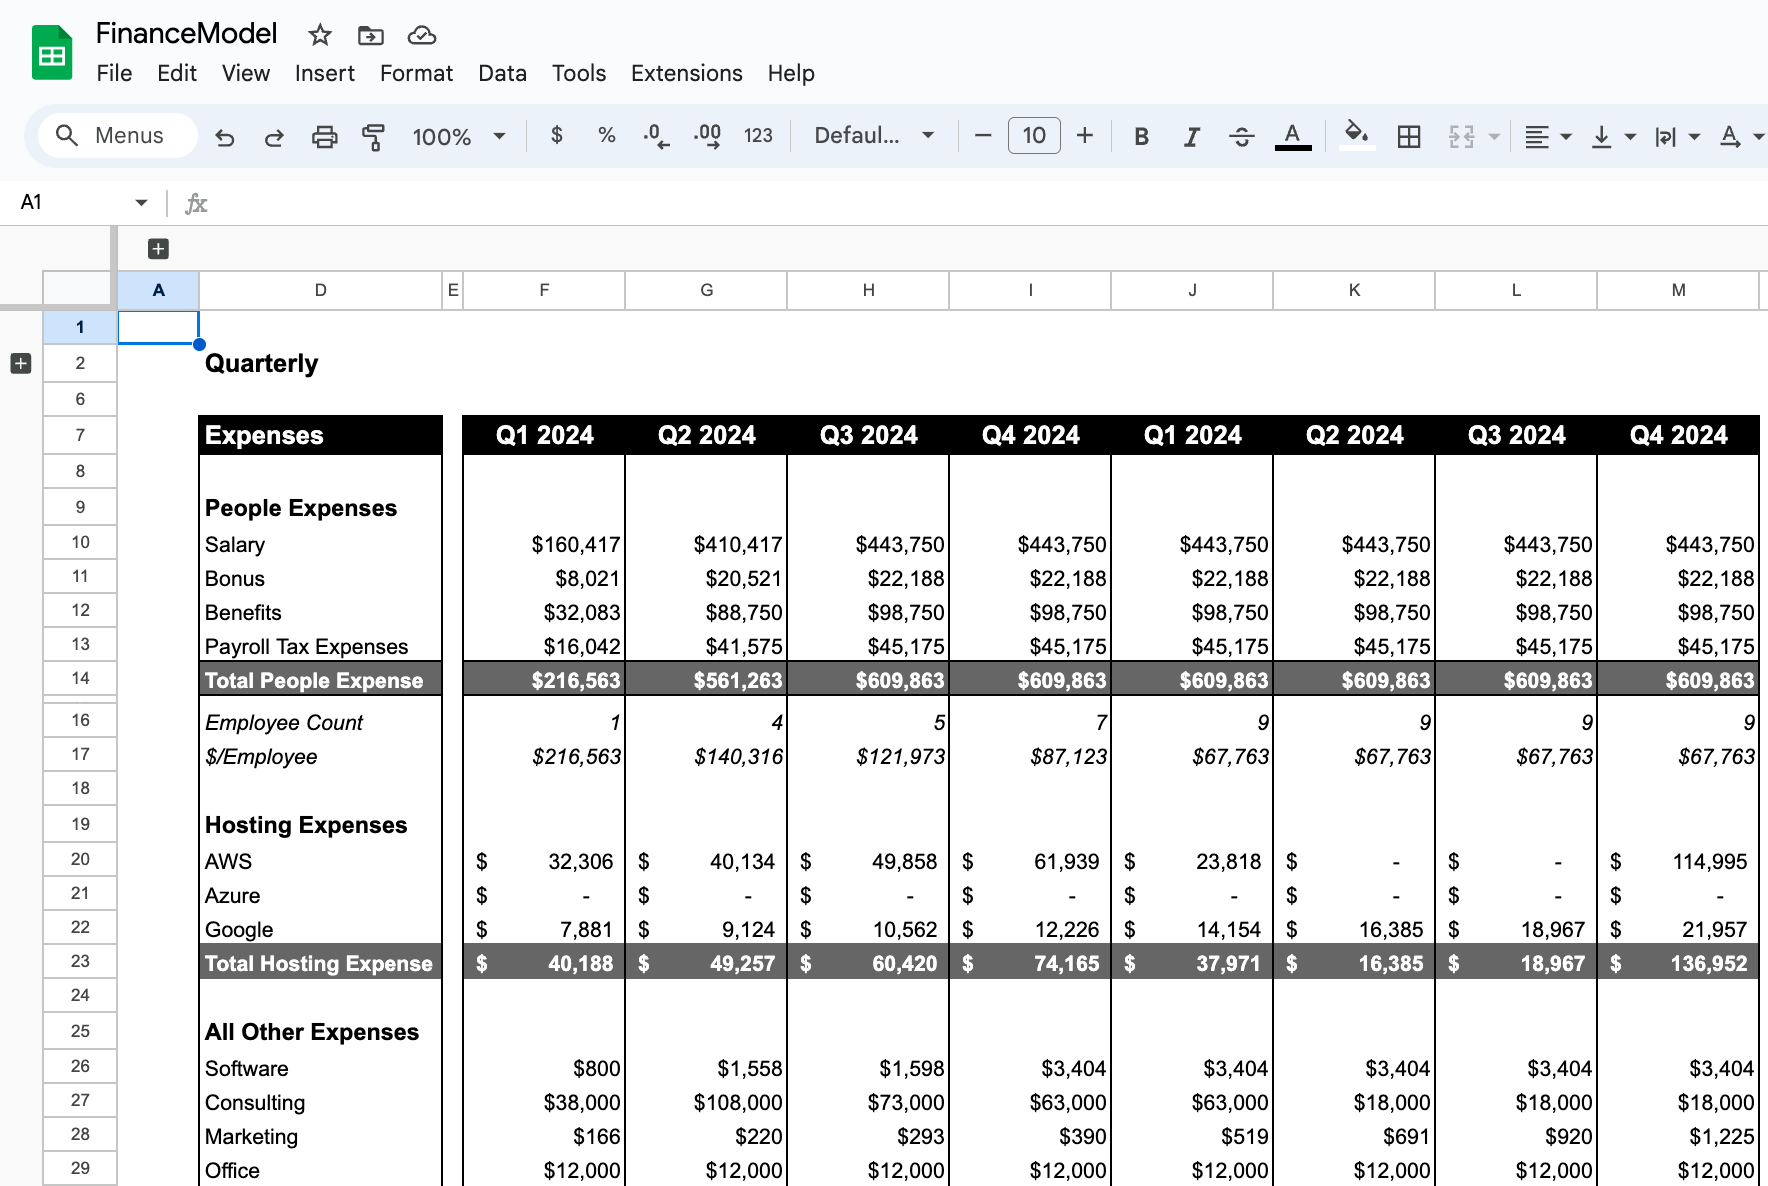 Link to EightLake Startup Finance Template